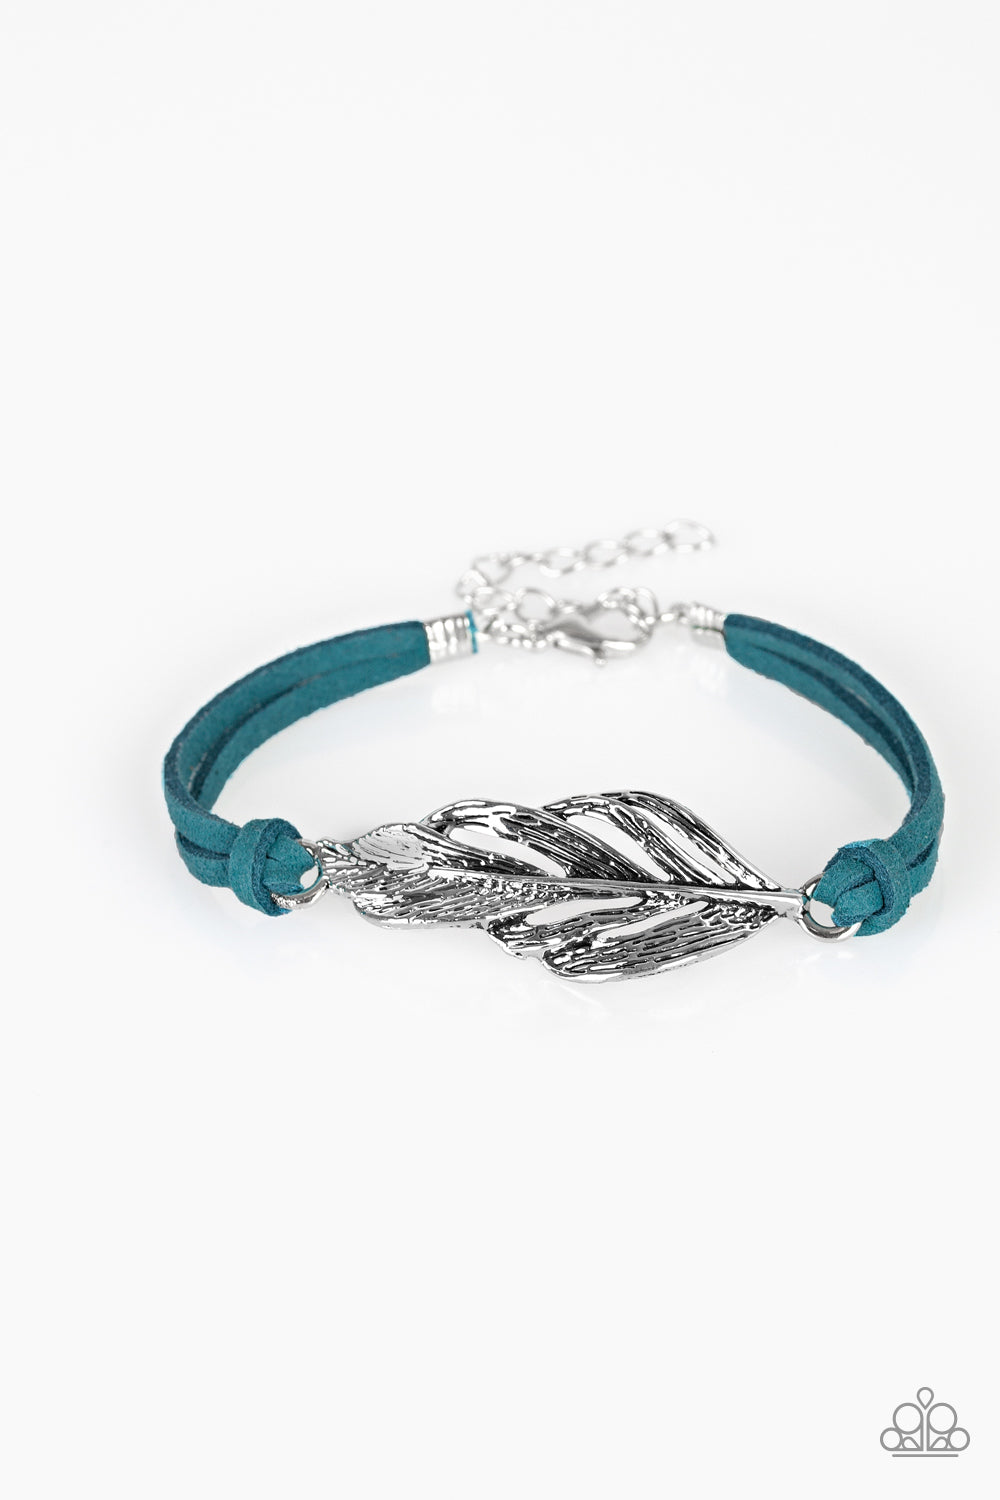 FASTER THAN FLIGHT - BLUE SUEDE FEATHER BRACELET